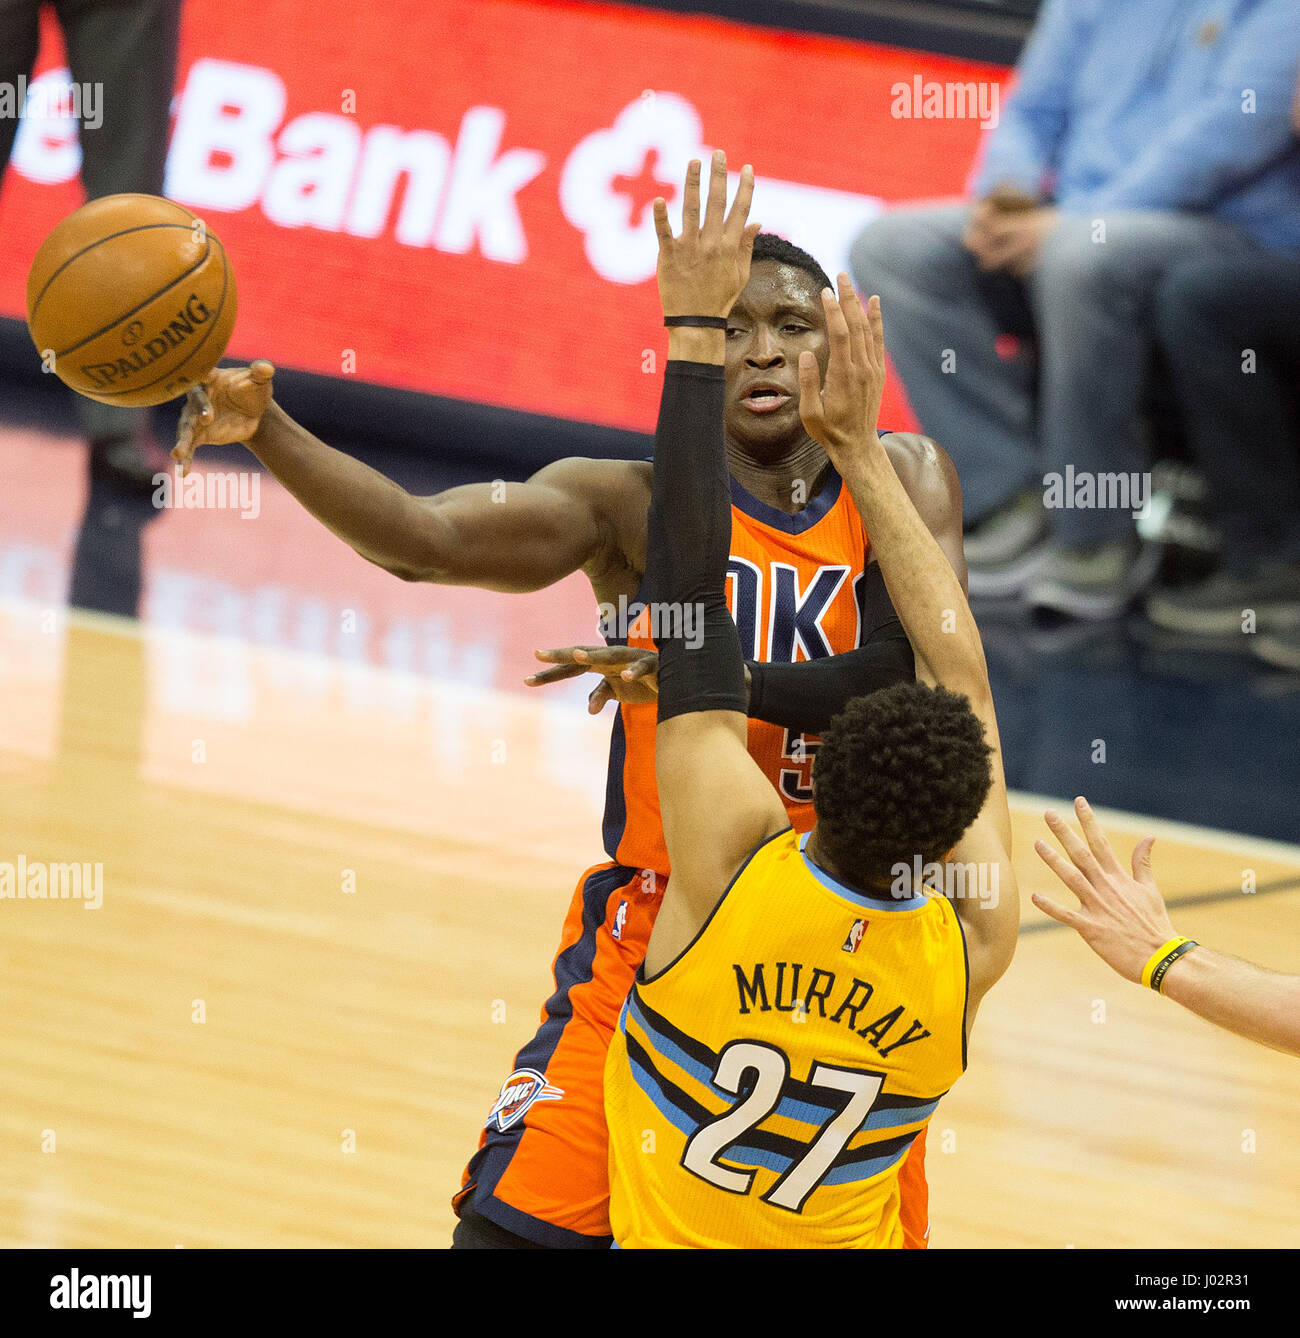 Denver, Colorado, USA. 9th Apr, 2017. Thunder's VICTOR OLADIPO, top, passes the ball past Nuggets JAMAL MURRAY, bottom, during the 1st. Half at the Pepsi Center Sunday afternoon. The Thunder beats the Nuggets 106-105. Credit: Hector Acevedo/ZUMA Wire/Alamy Live News Stock Photo